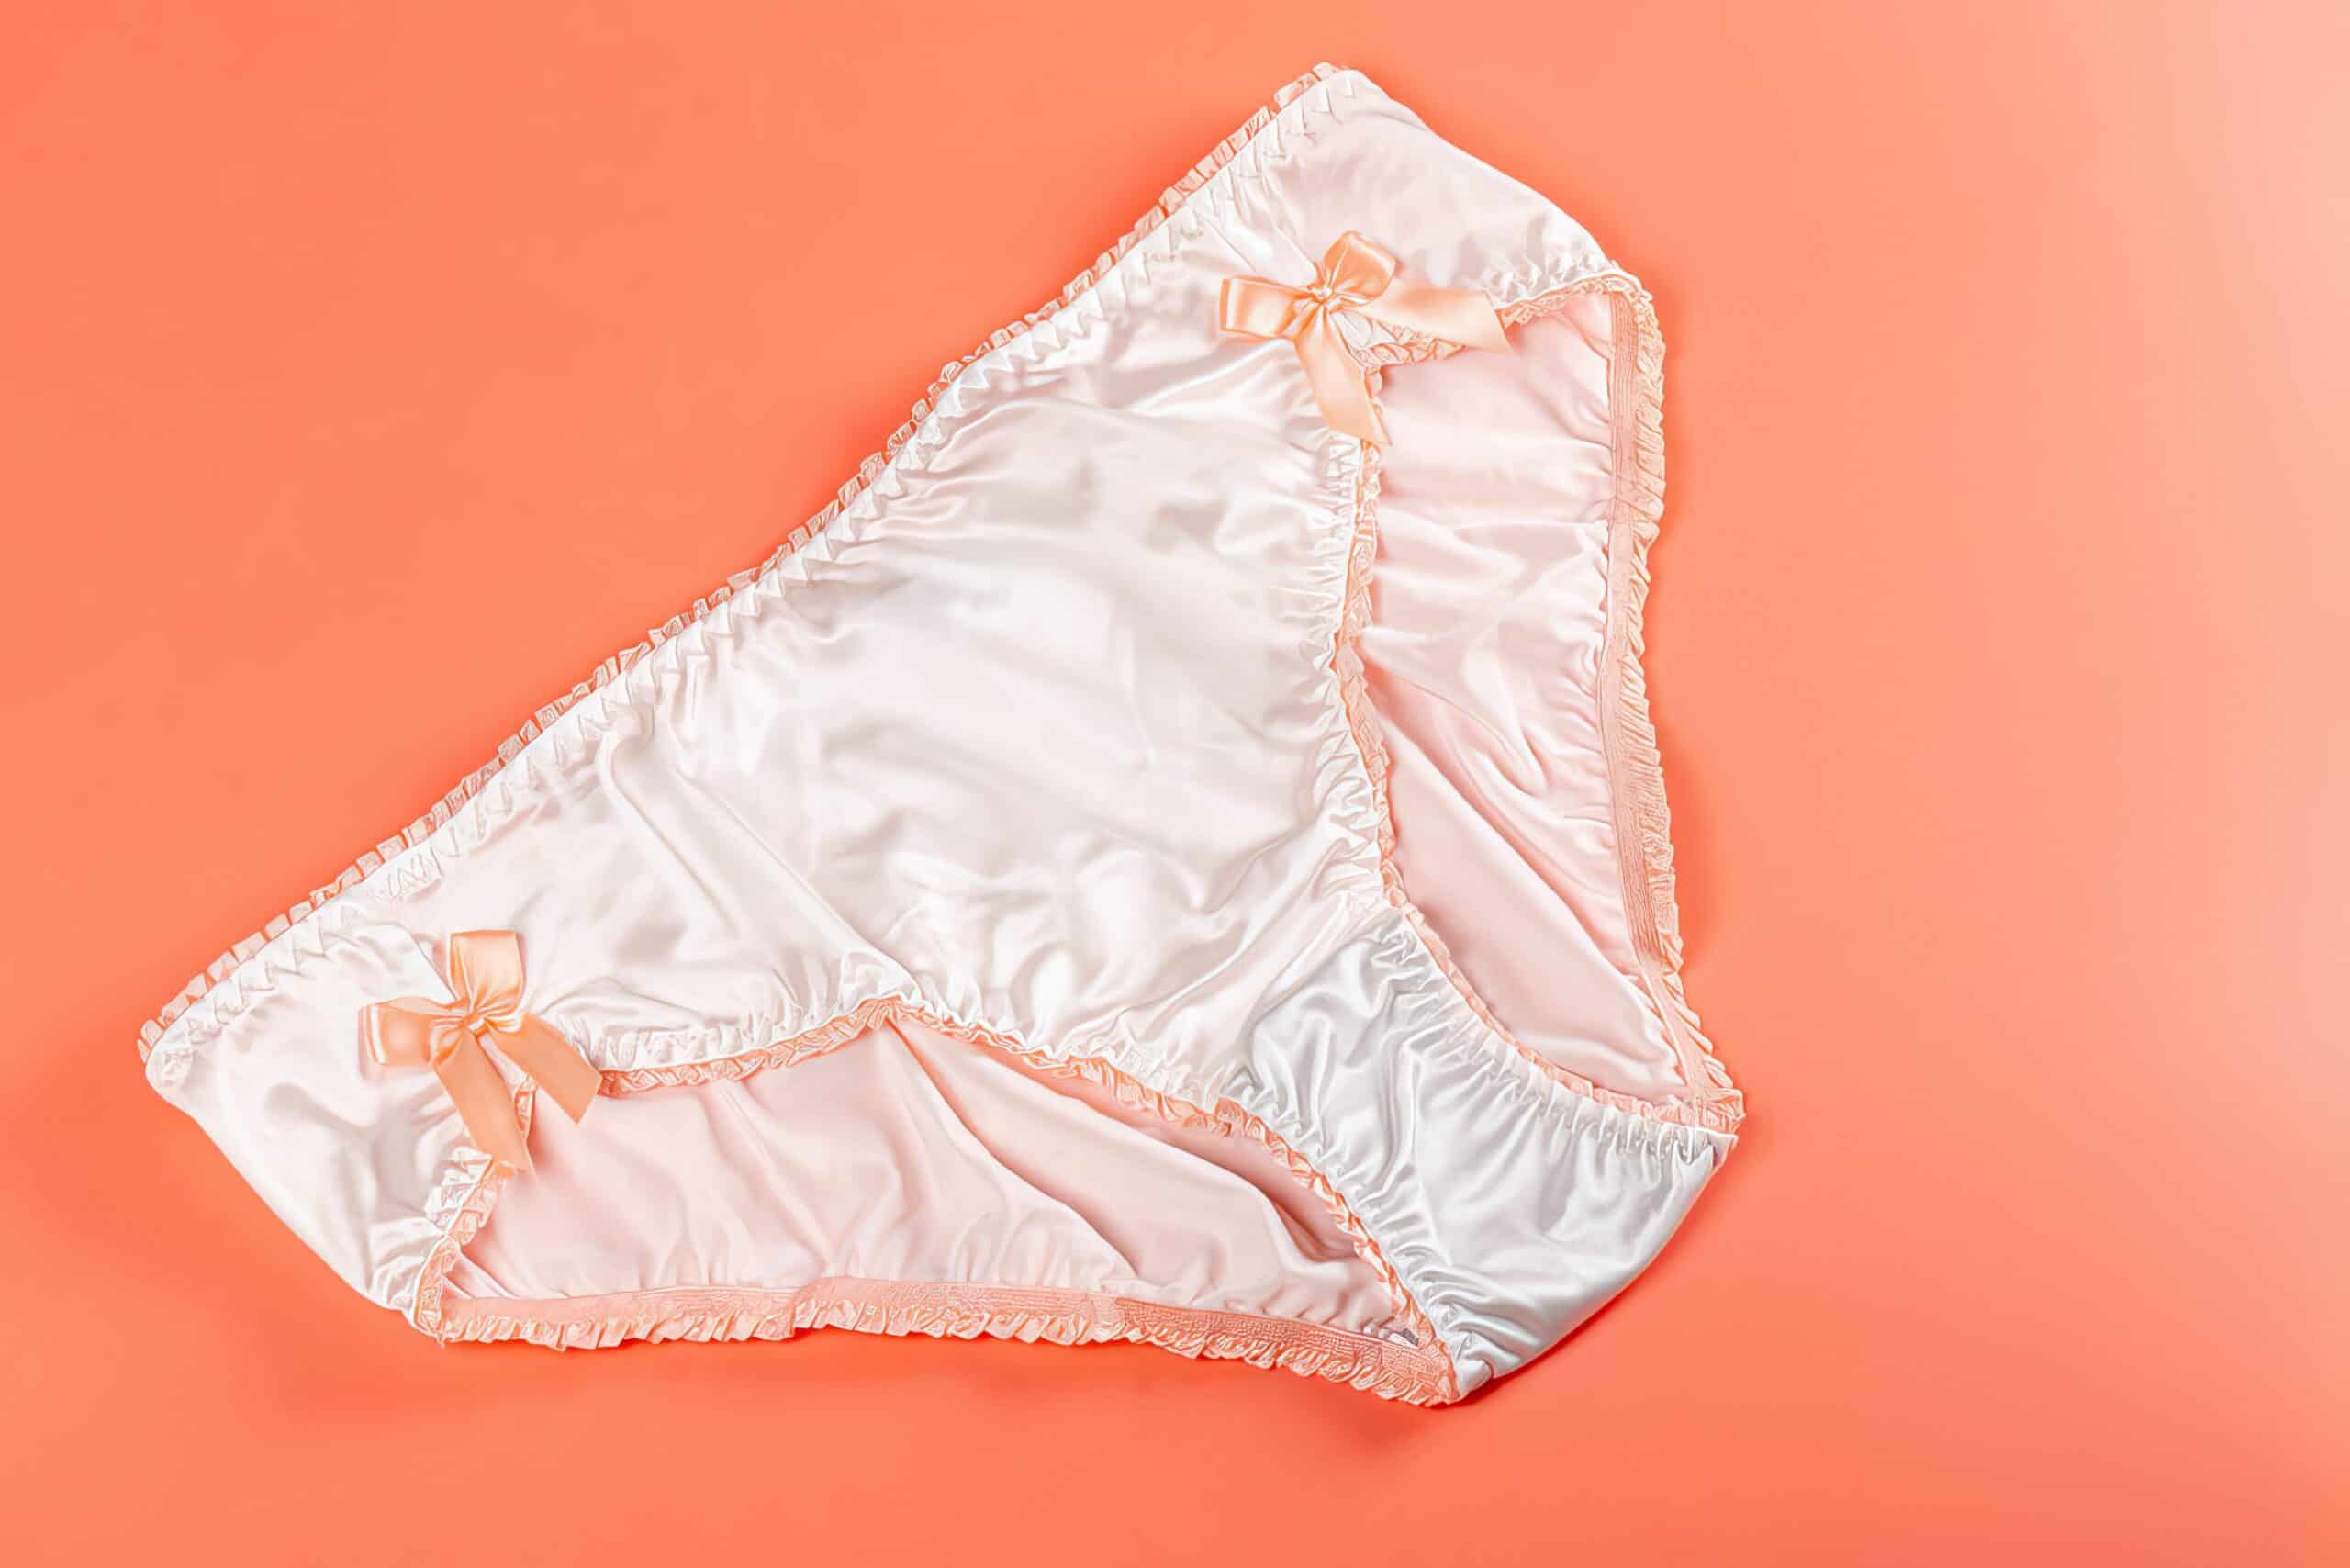 Cotton Vs Nylon Underwear: Which Is Better For Sensitive Skin? - Tidbits Of  Experience